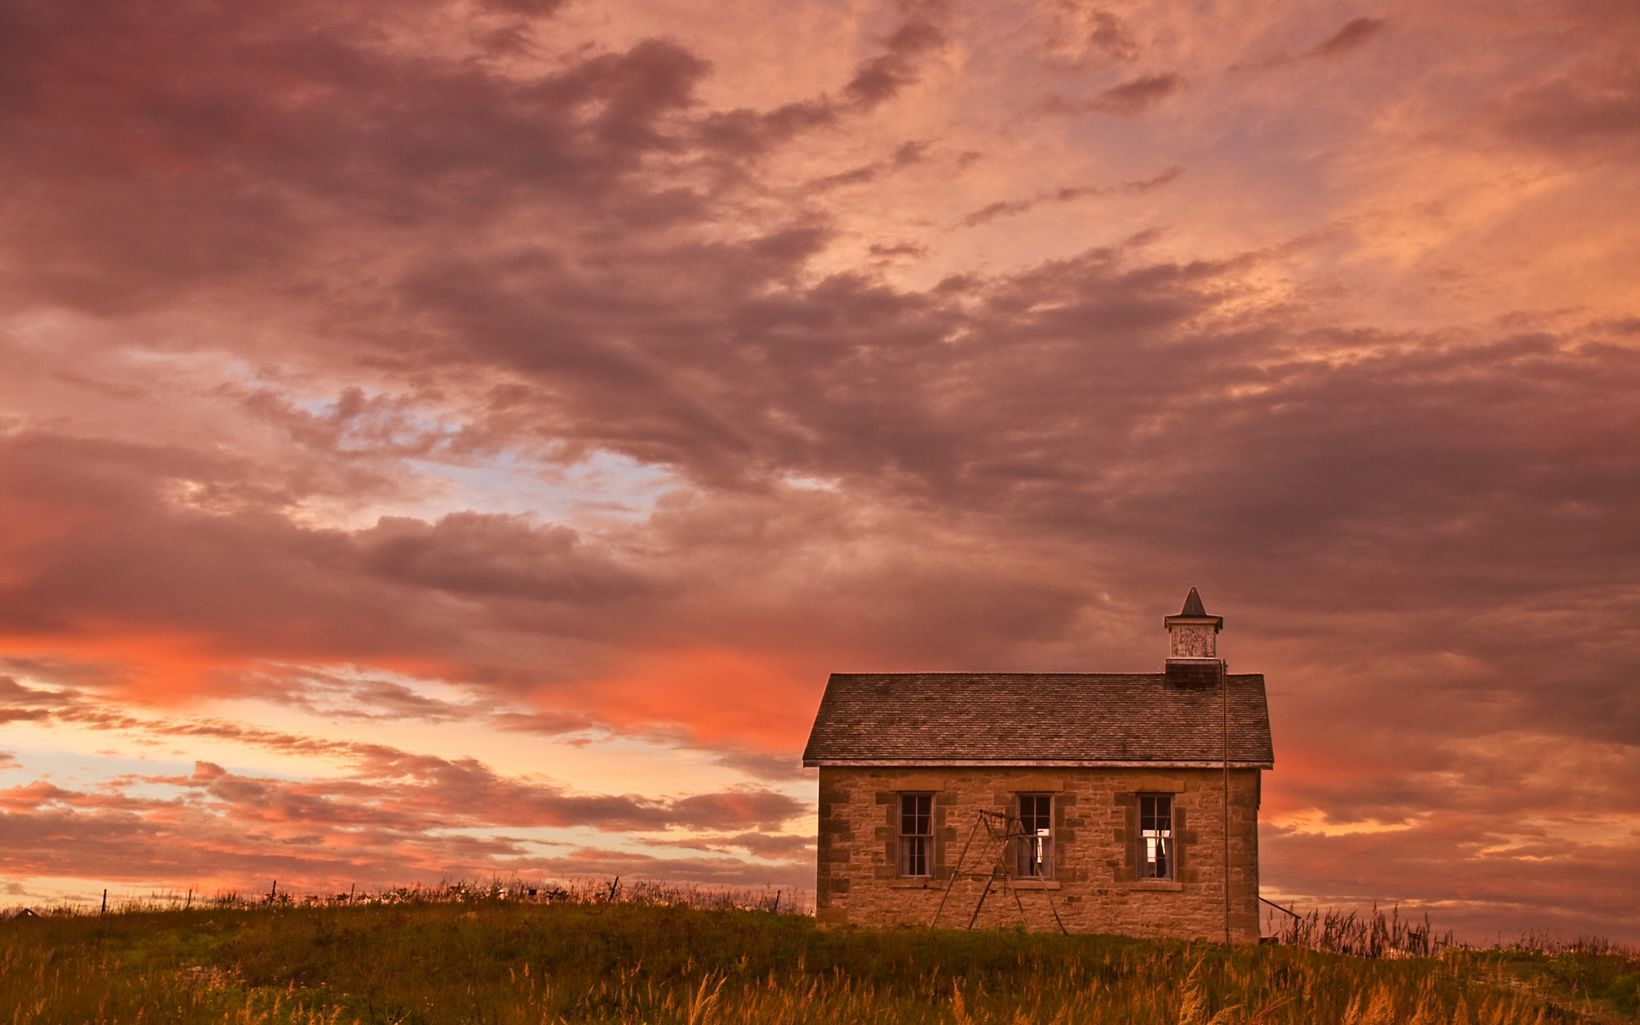 Small stone school house sits alone in a field.